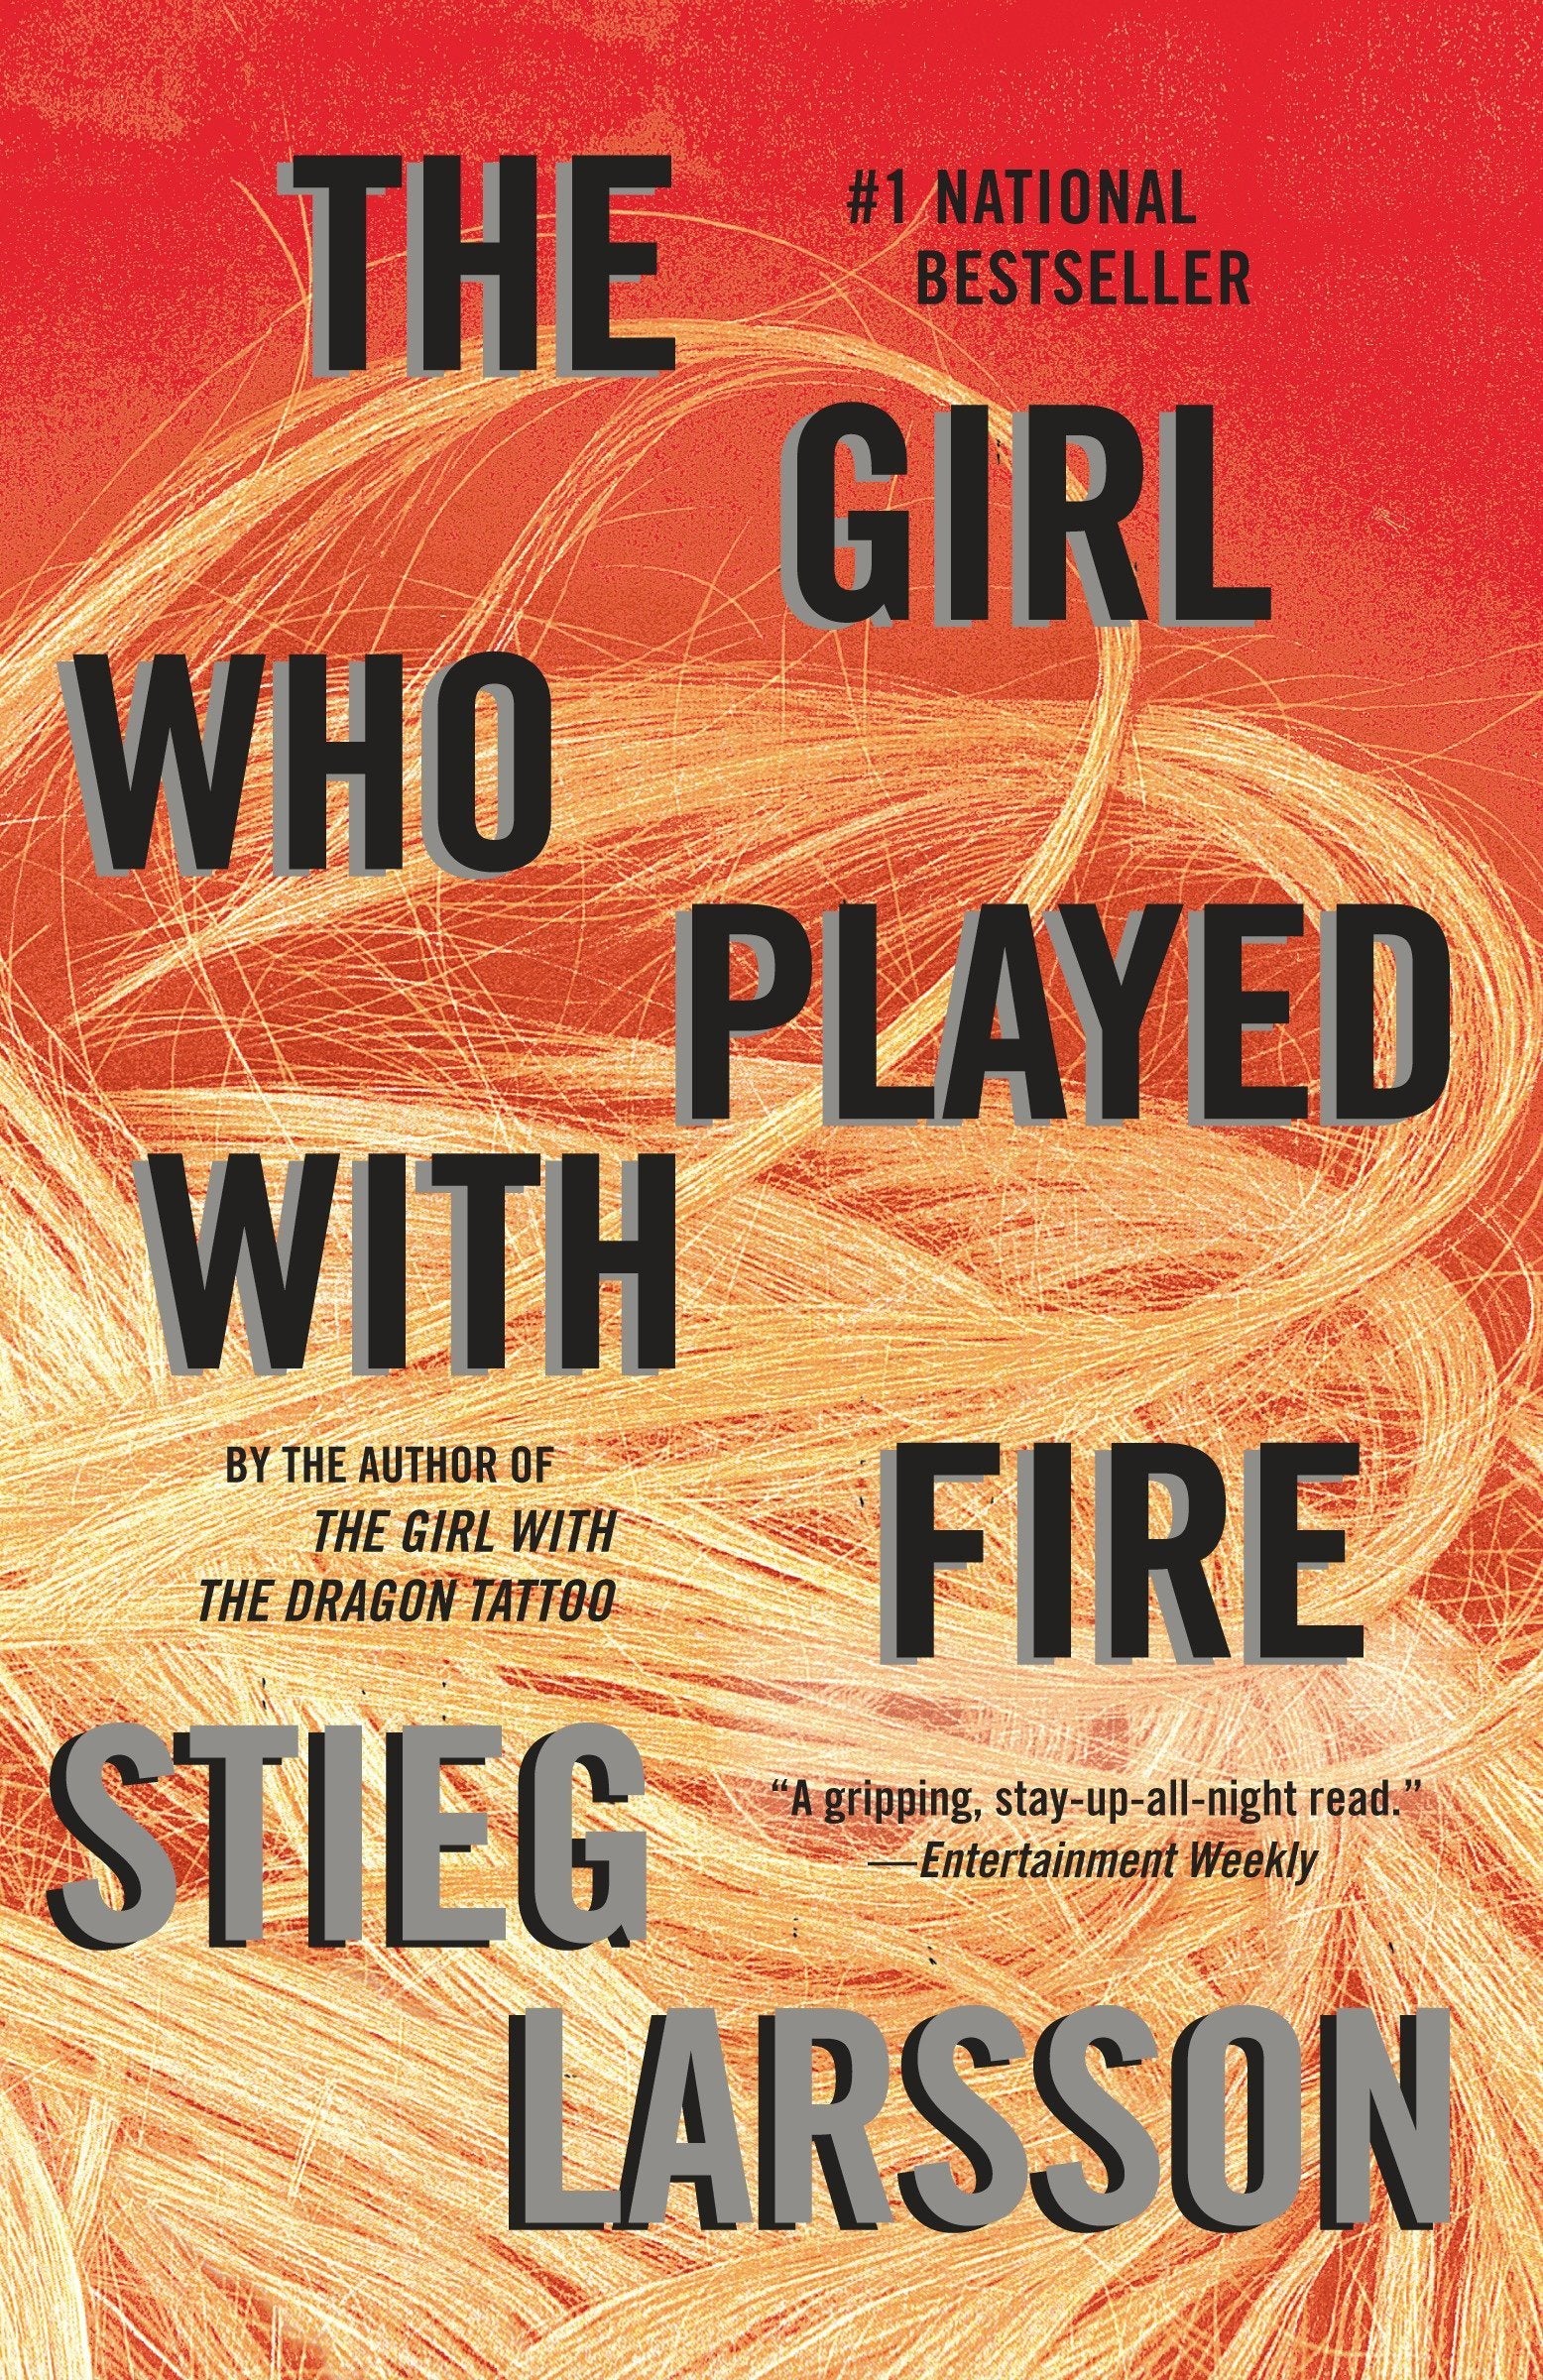 The Girl Who Played with Fire: A Lisbeth Salander Novel (The Girl with the Dragon Tattoo Series)